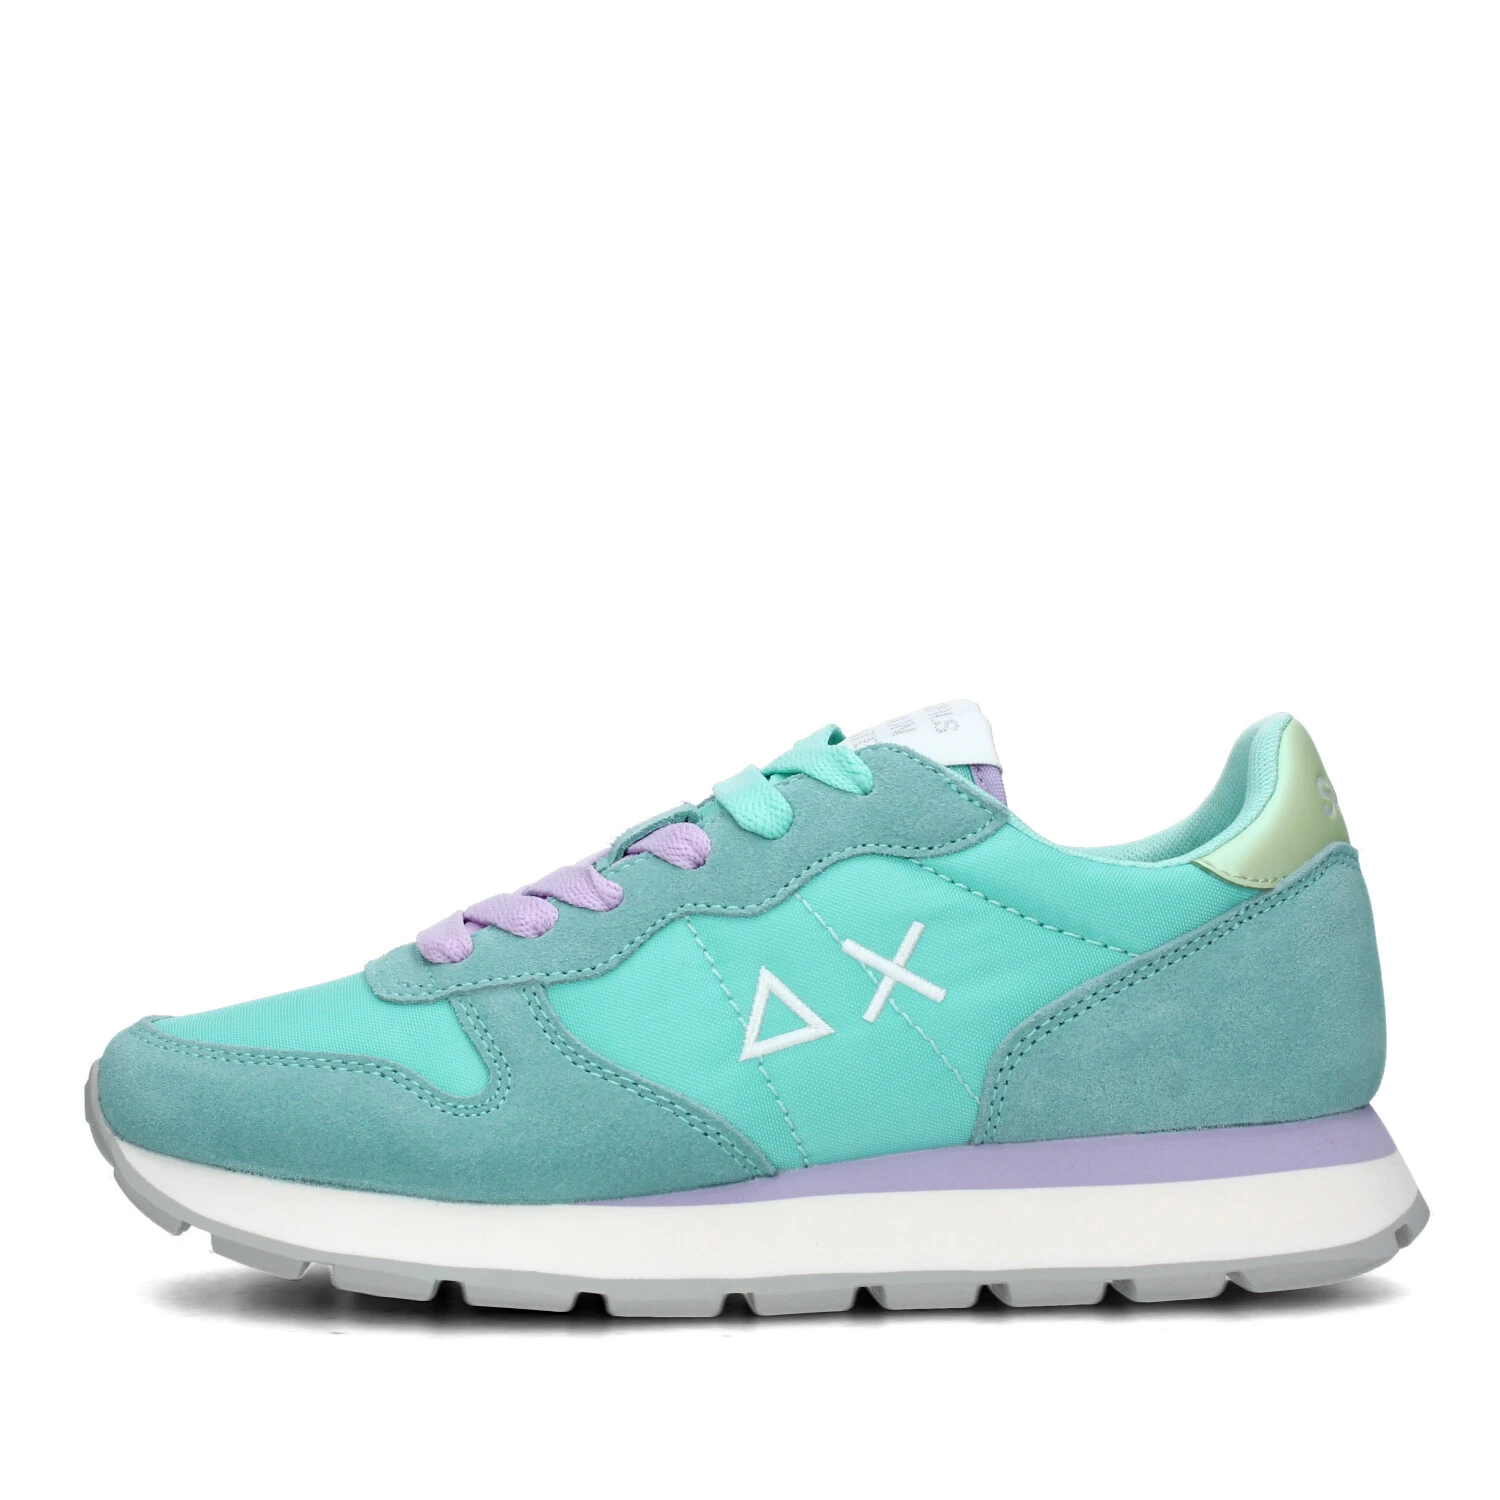 SNEAKERS BASSE ALLY SOLID DONNA VERDE ACQUA